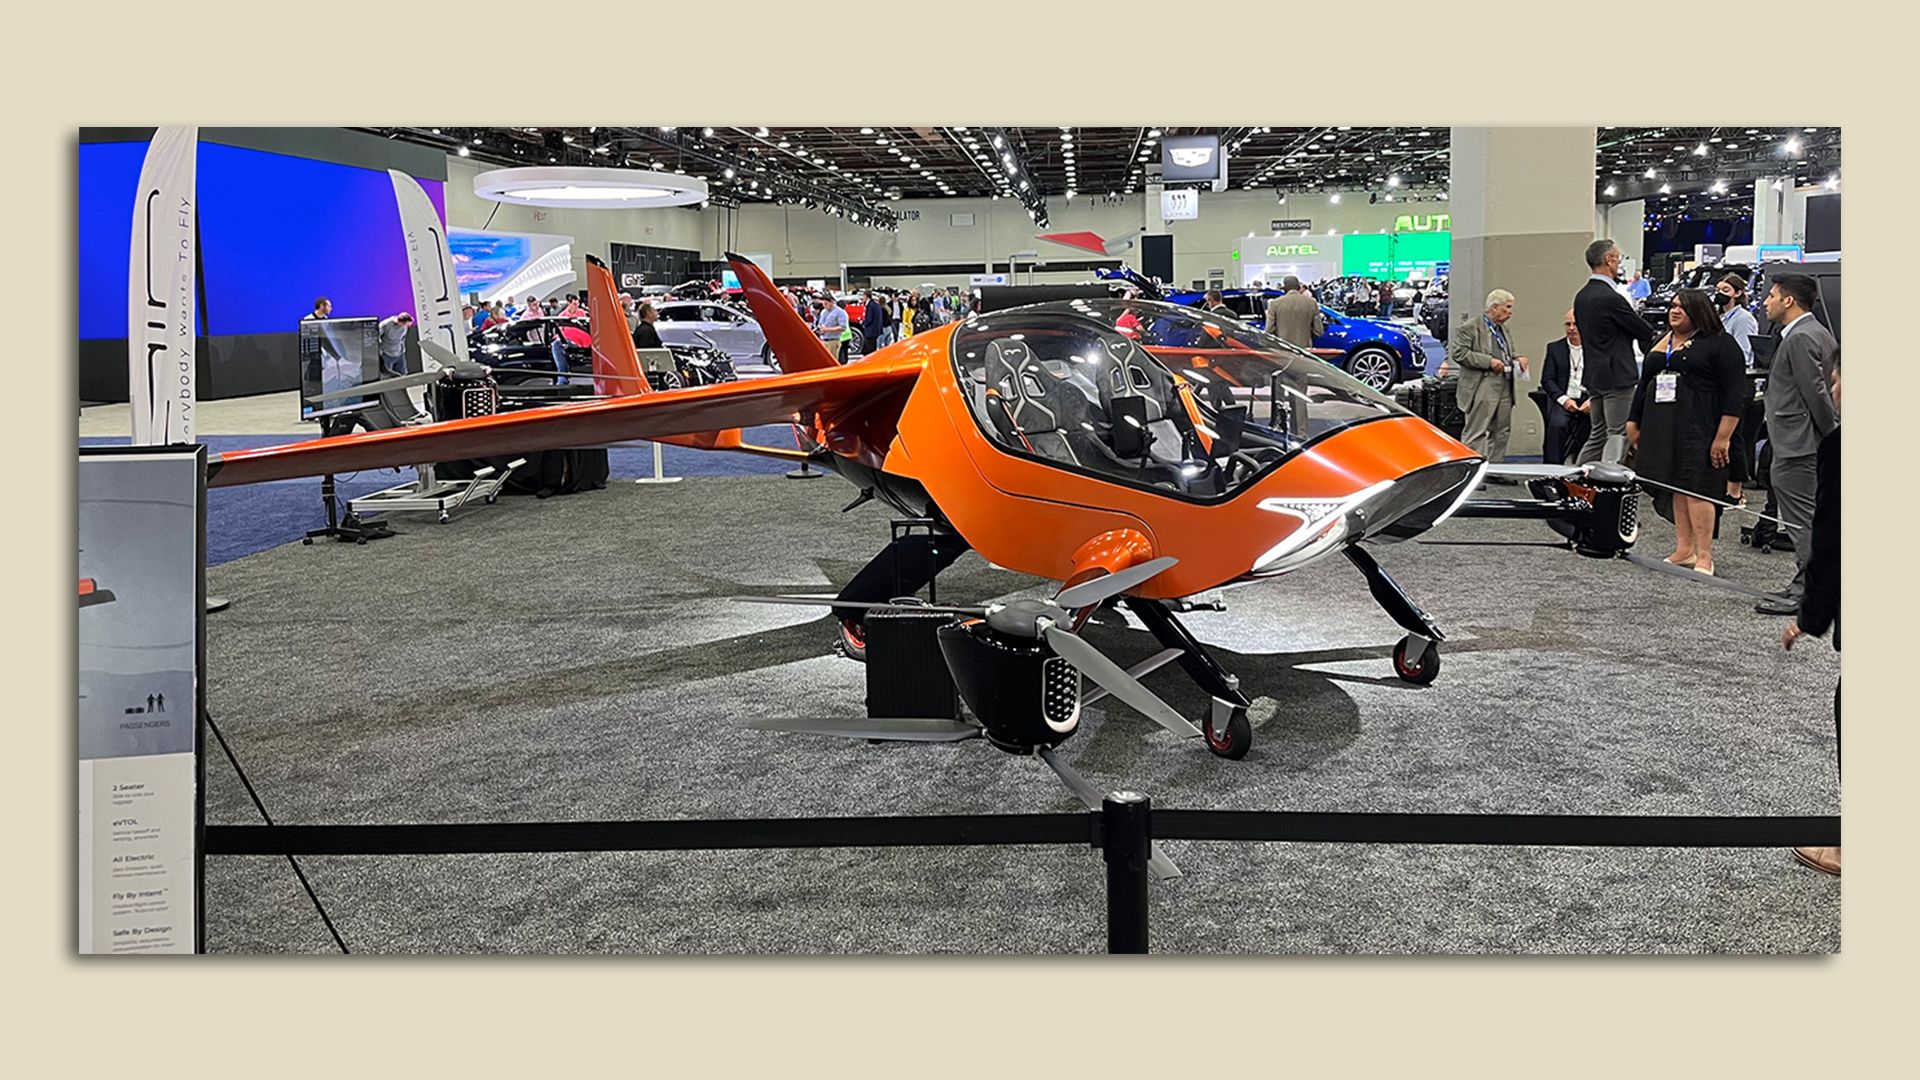 An electric aircraft on display at the Detroit auto show.